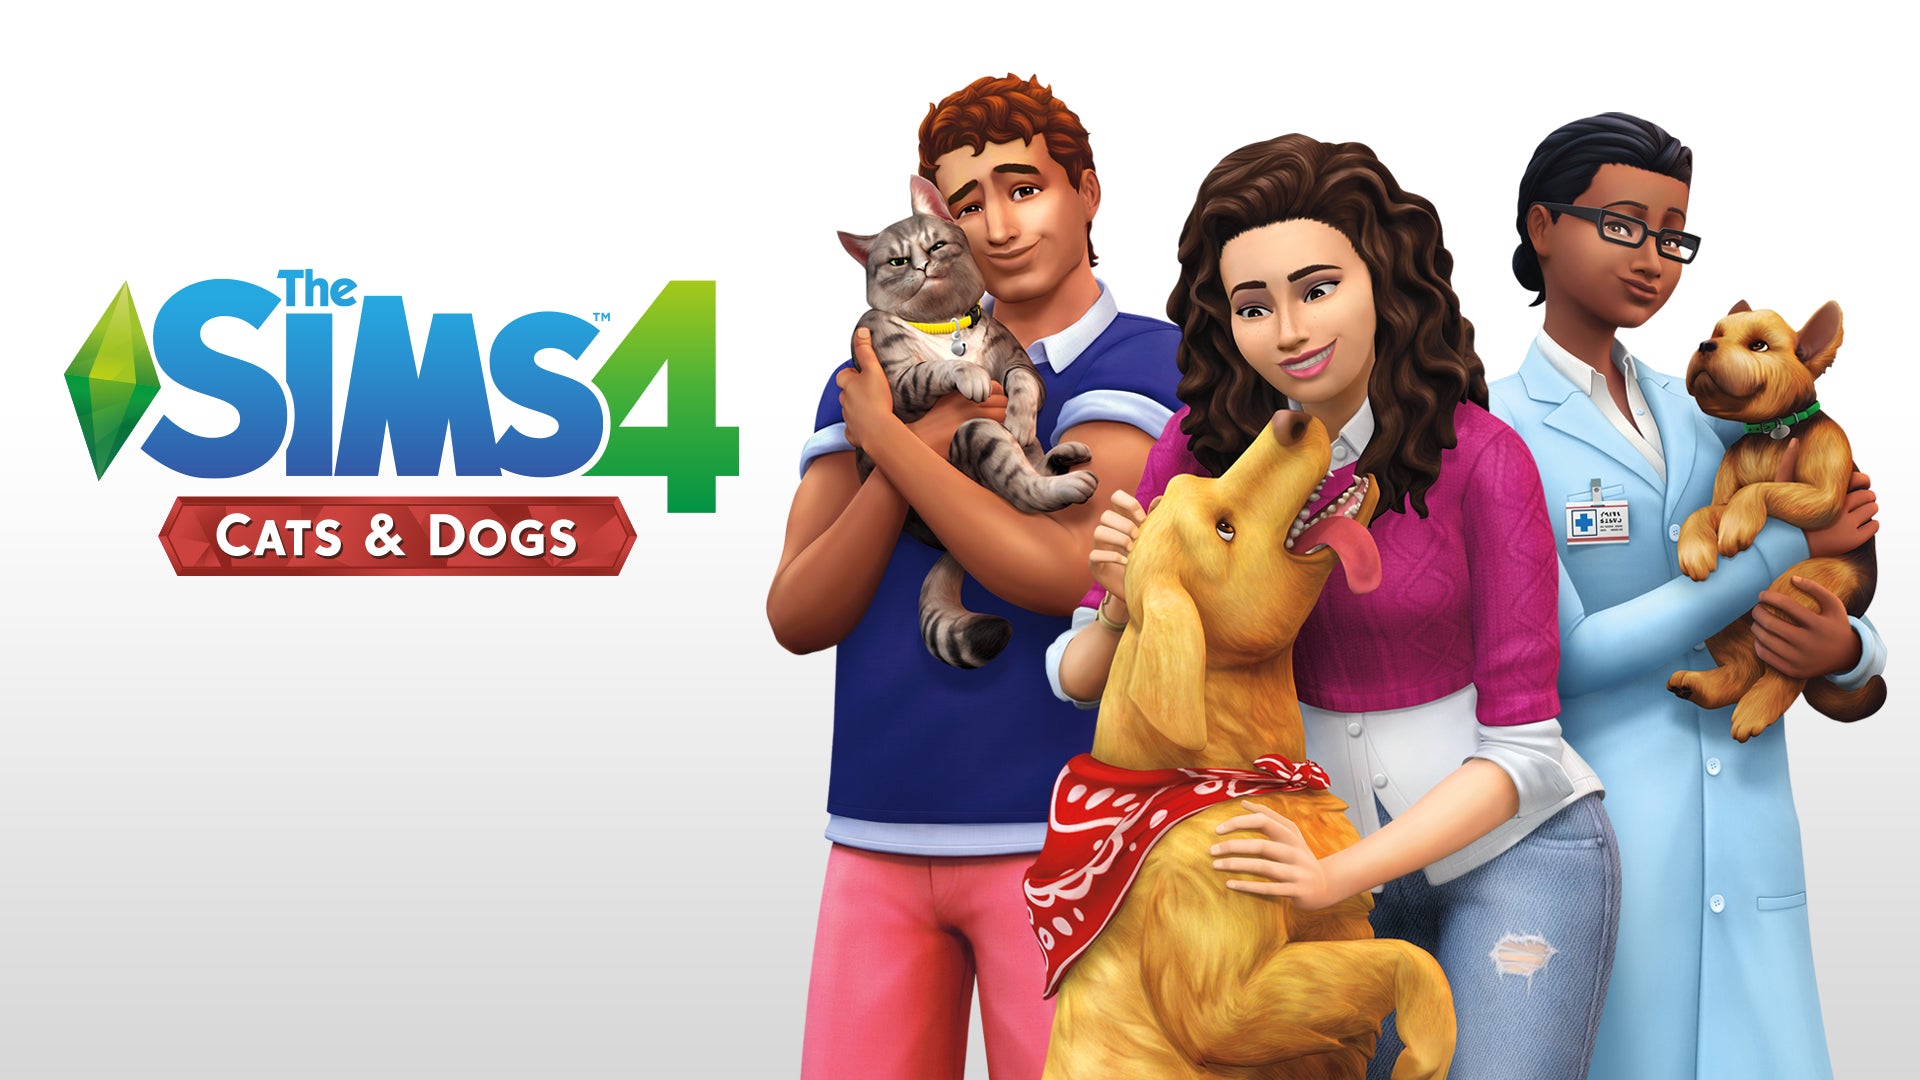 The 4 Cats & Dogs – ezgame.dk